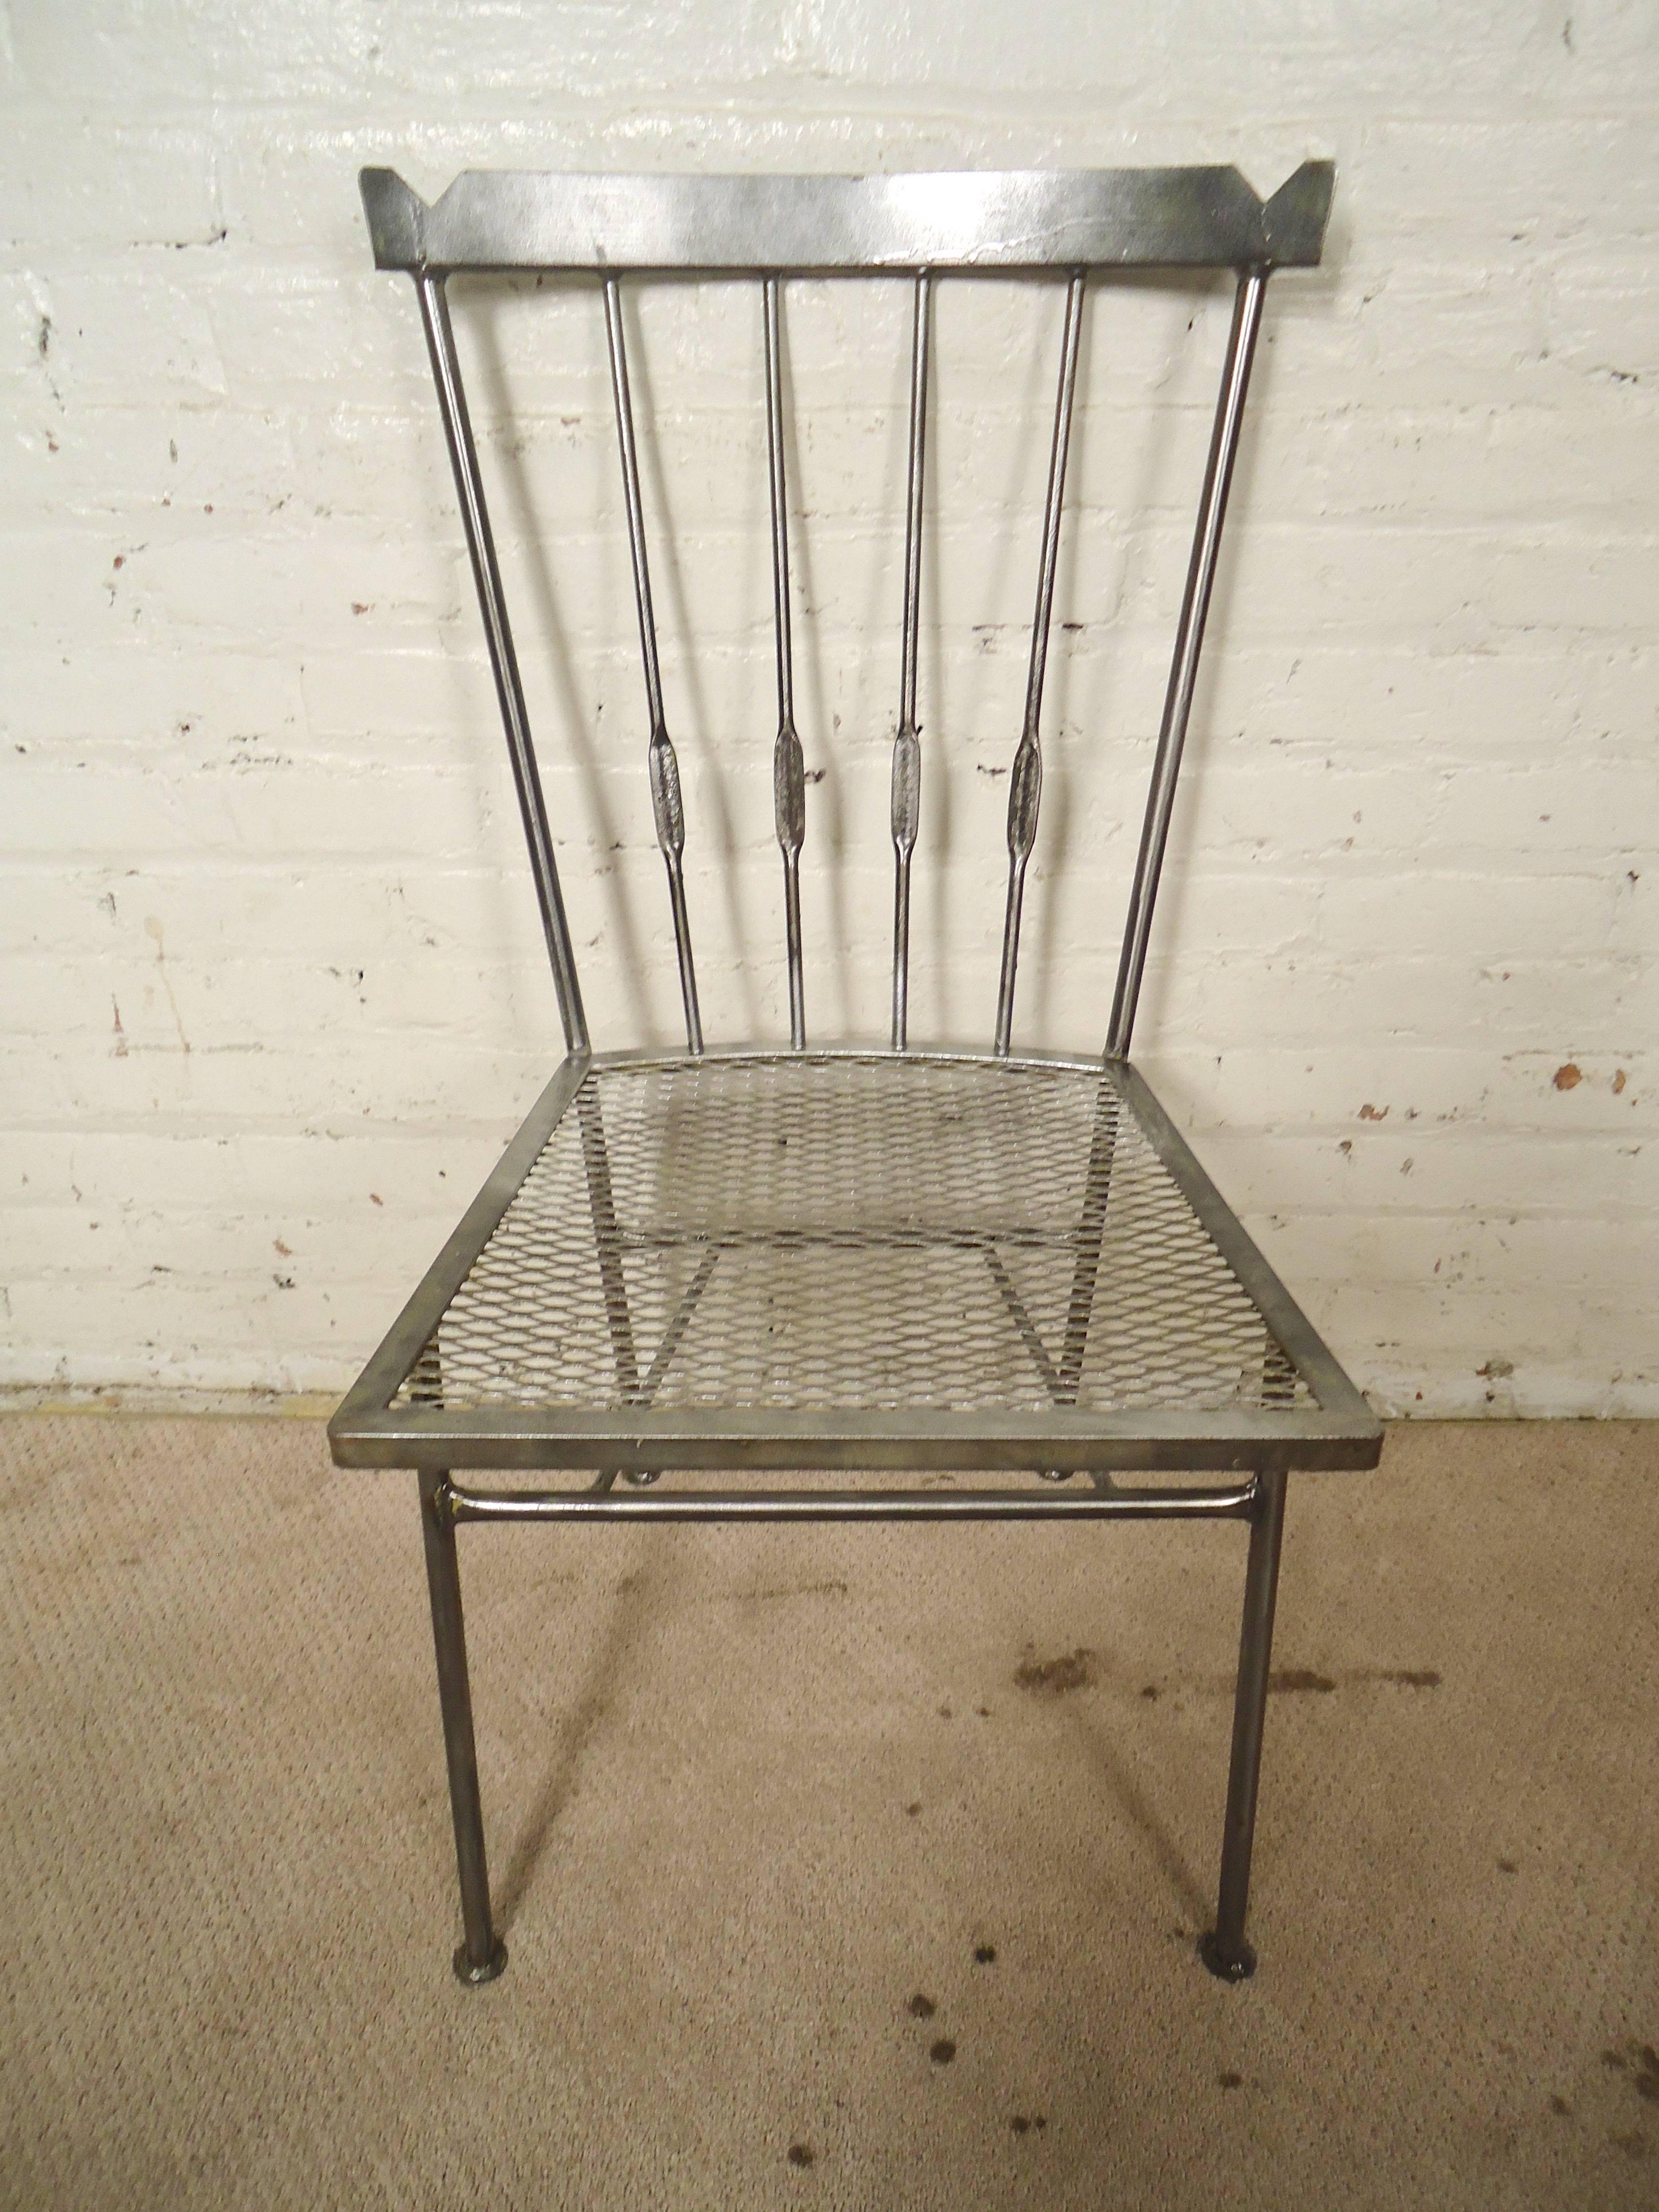 Set of four unique chairs with mesh seats and tall spindle backs. Refinished in a handsome bare metal style. Great for a modern dining room or covered patio.

(Please confirm item location - NY or NJ - with dealer)